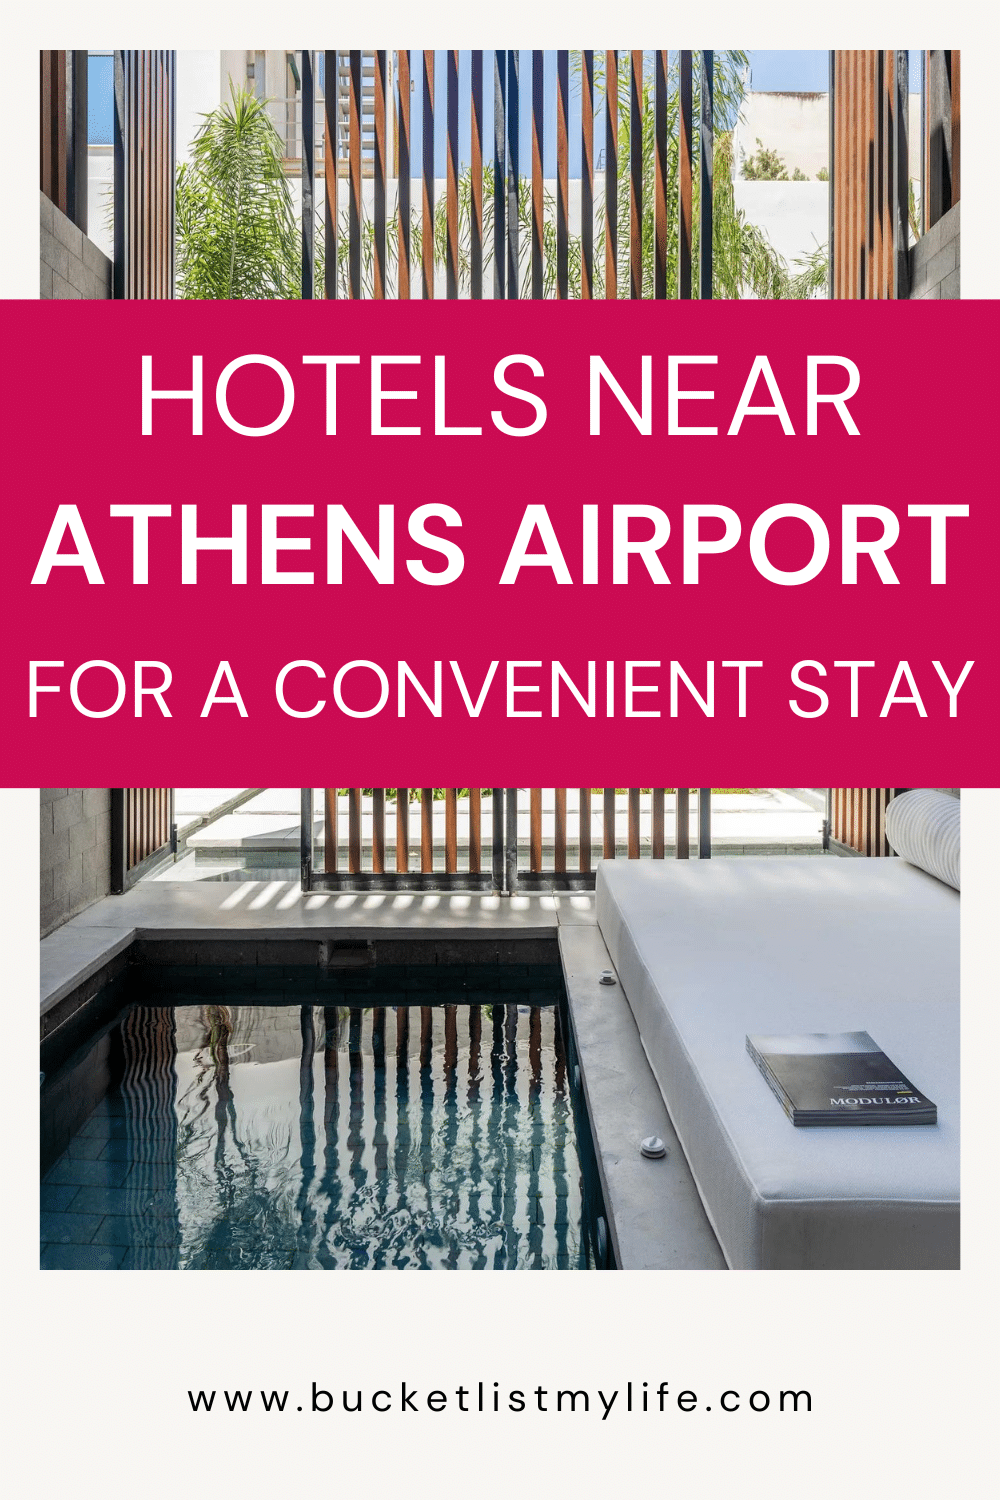 11 Hotels Near Athens Airport for a Convenient Stay